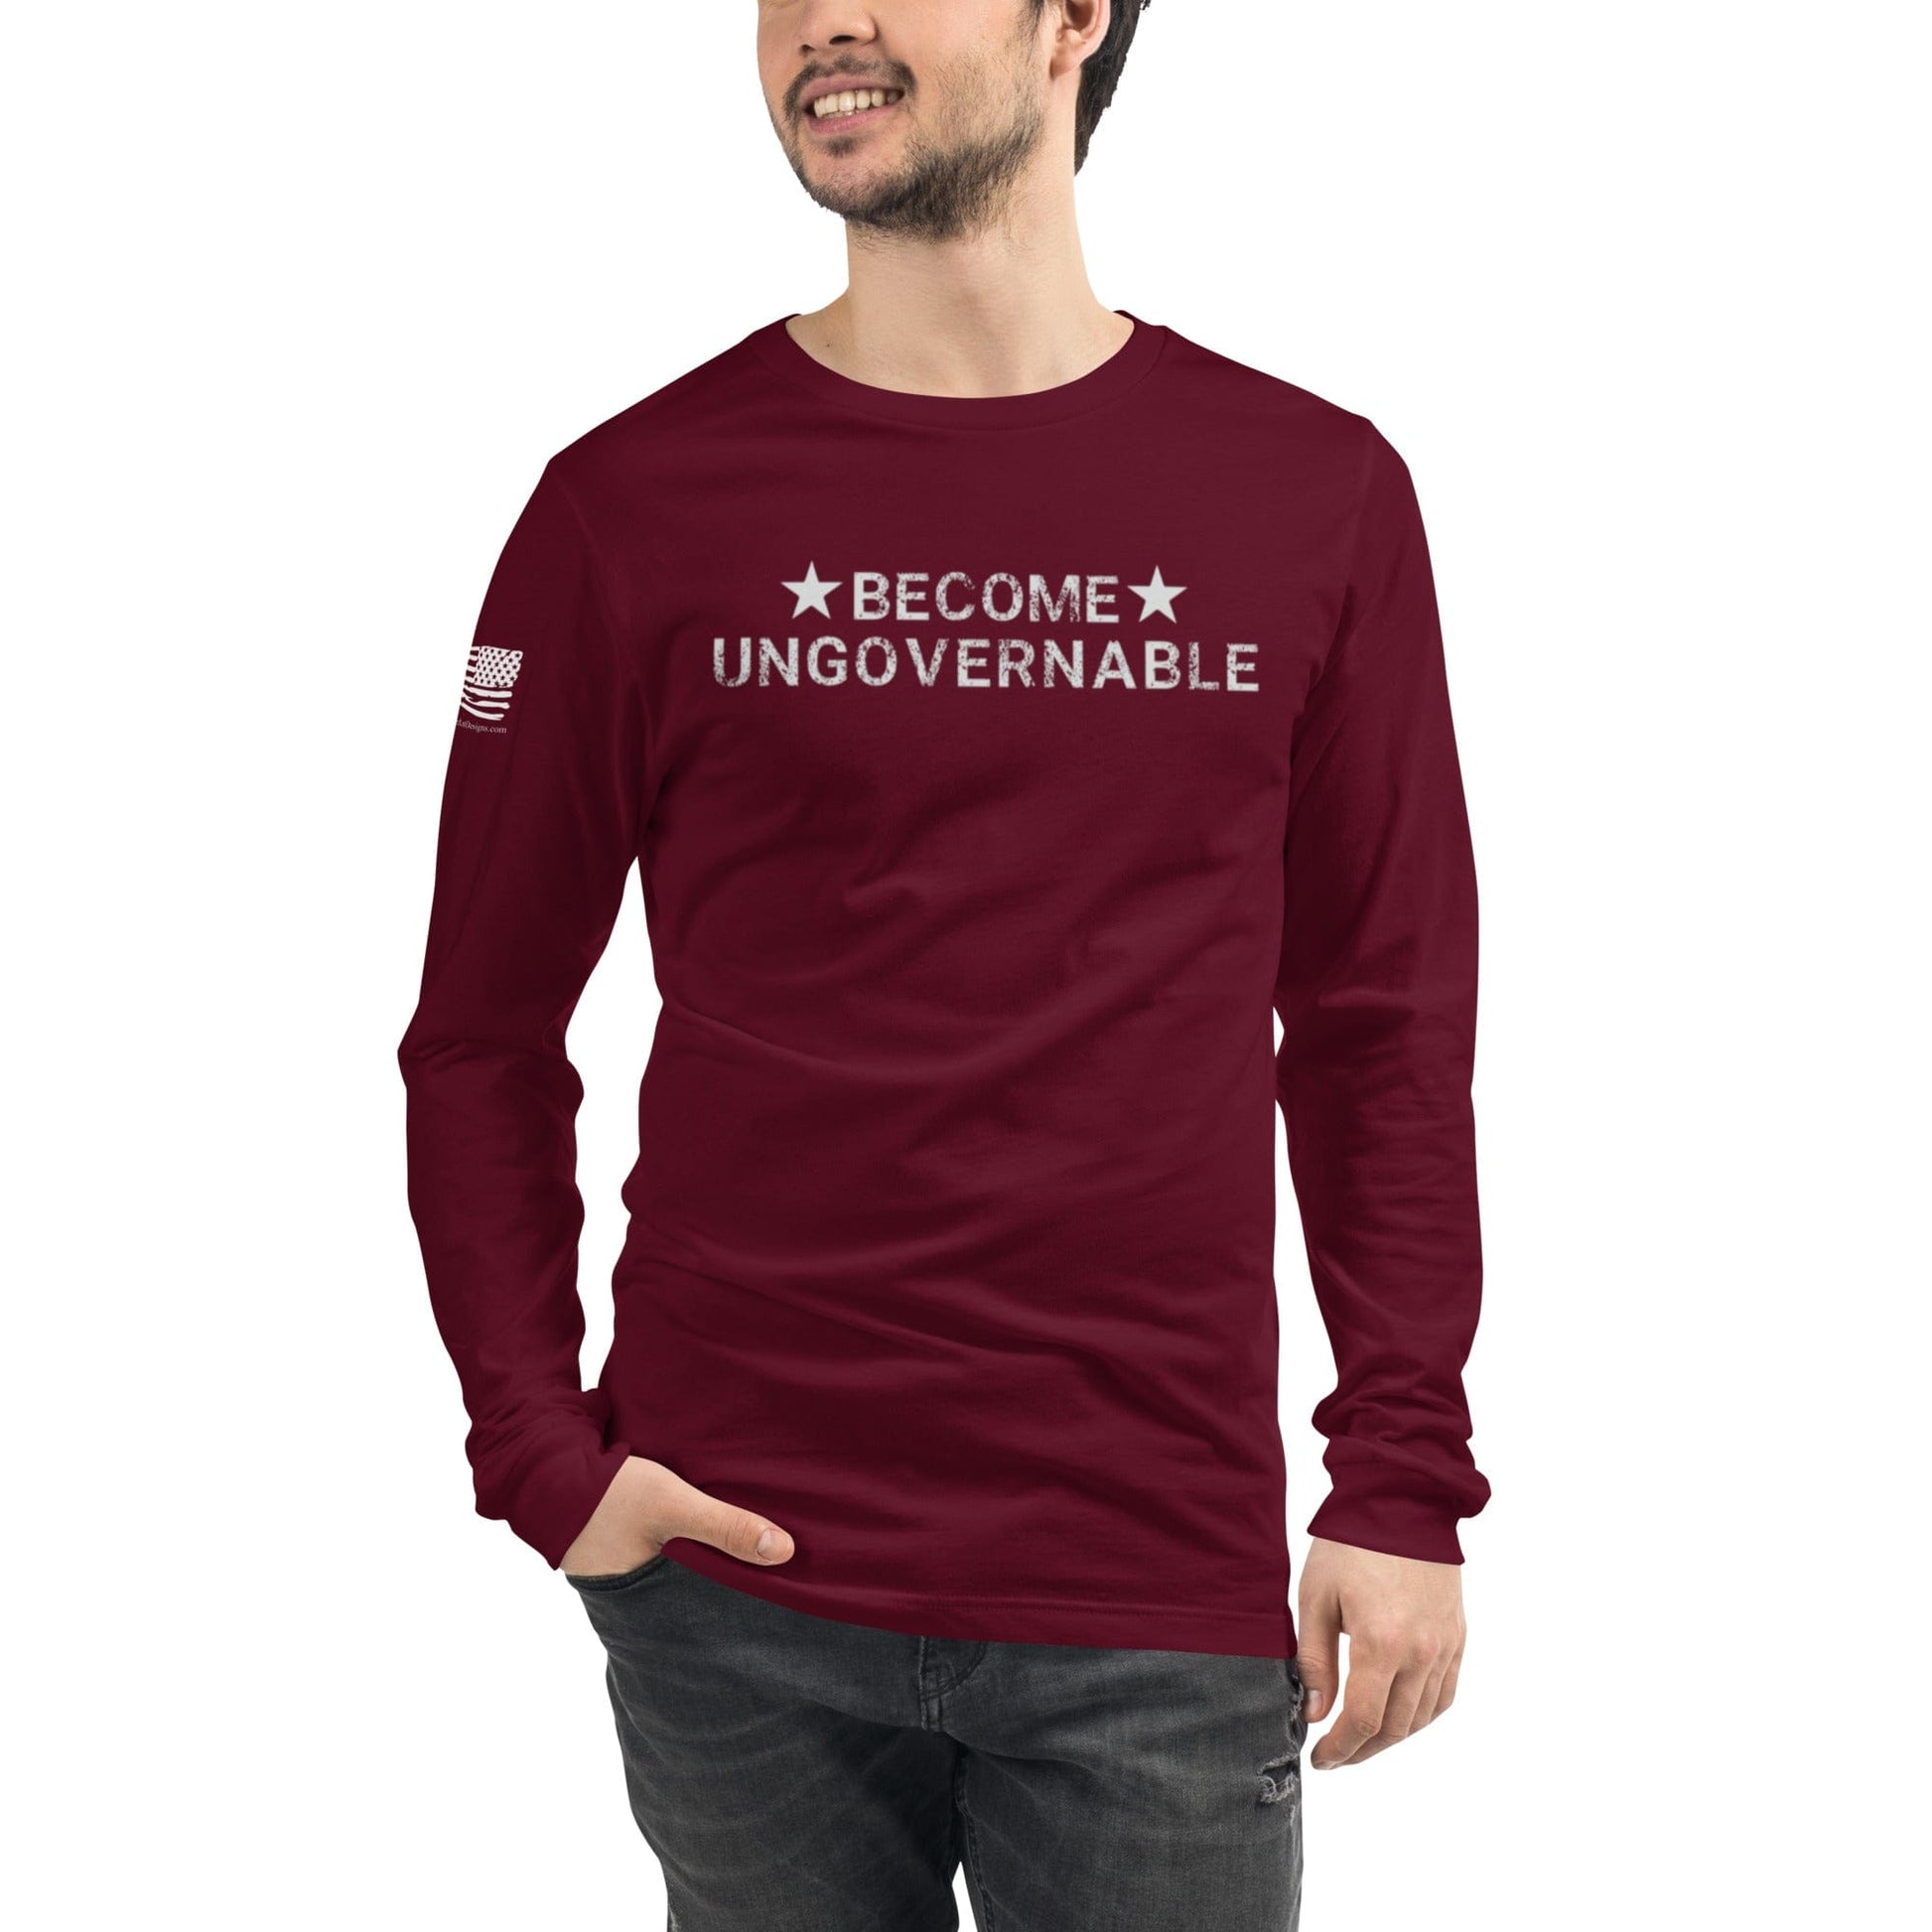 FreedomKat Designs Long Sleeved Shirt Maroon / S Become Ungovernable Long Sleeve Shirt